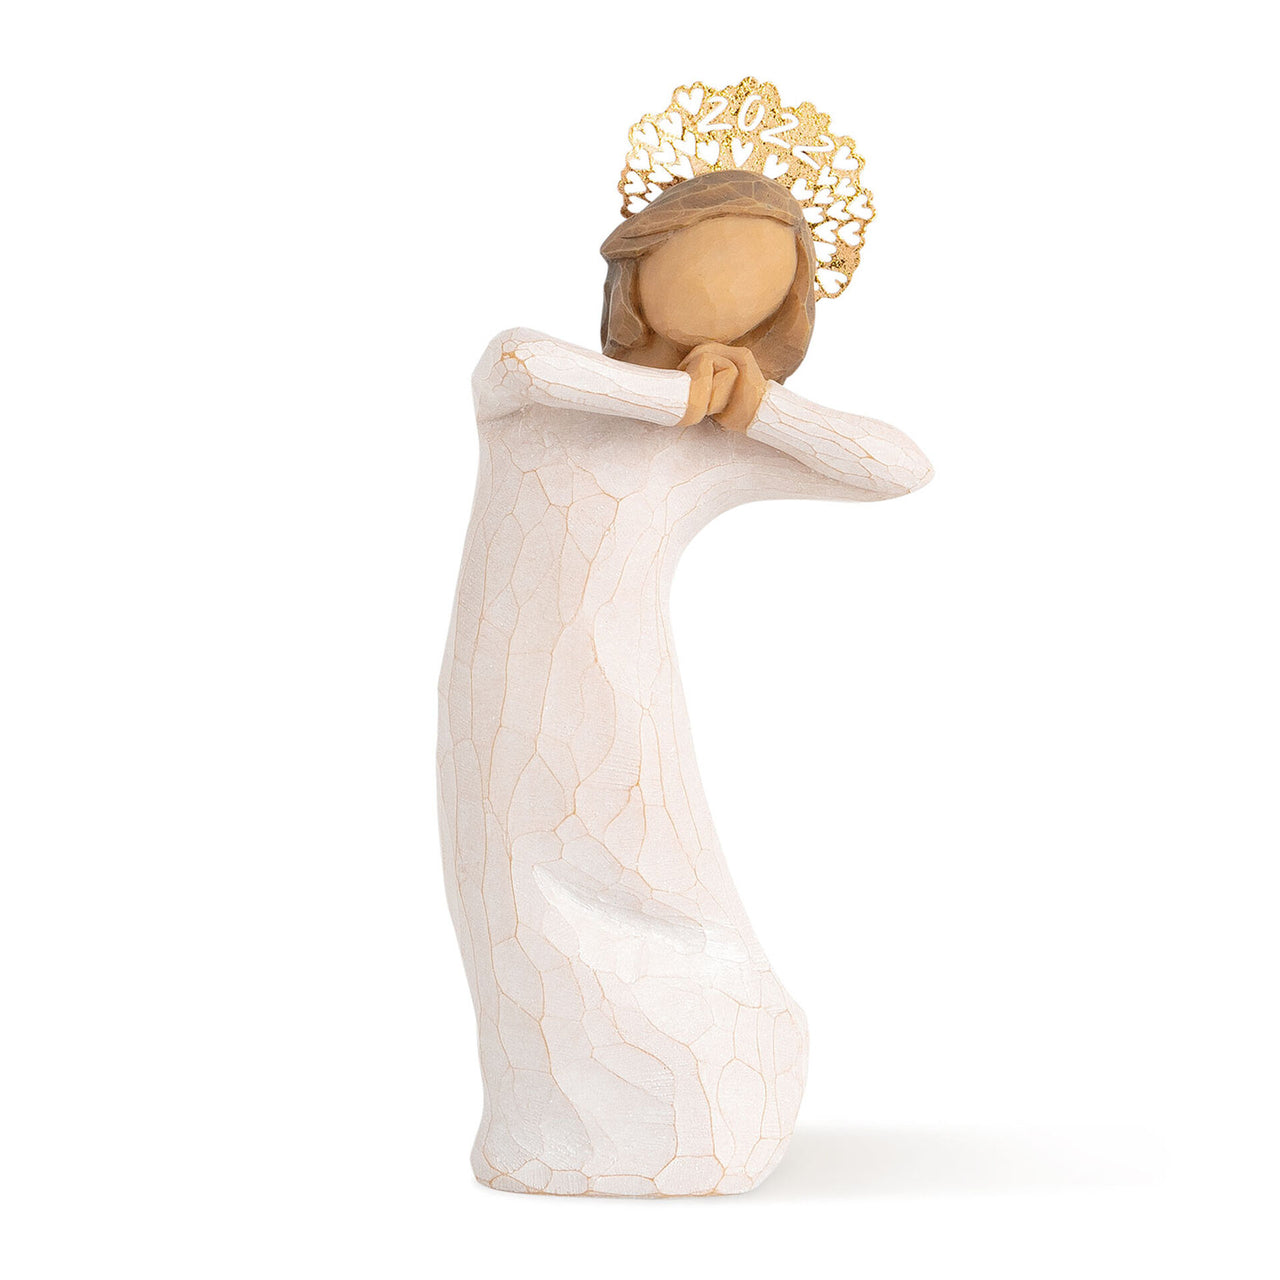 2022 Dated Willow Tree® Figure CELEBRATE Sculpted by Susan Lordi - SALE